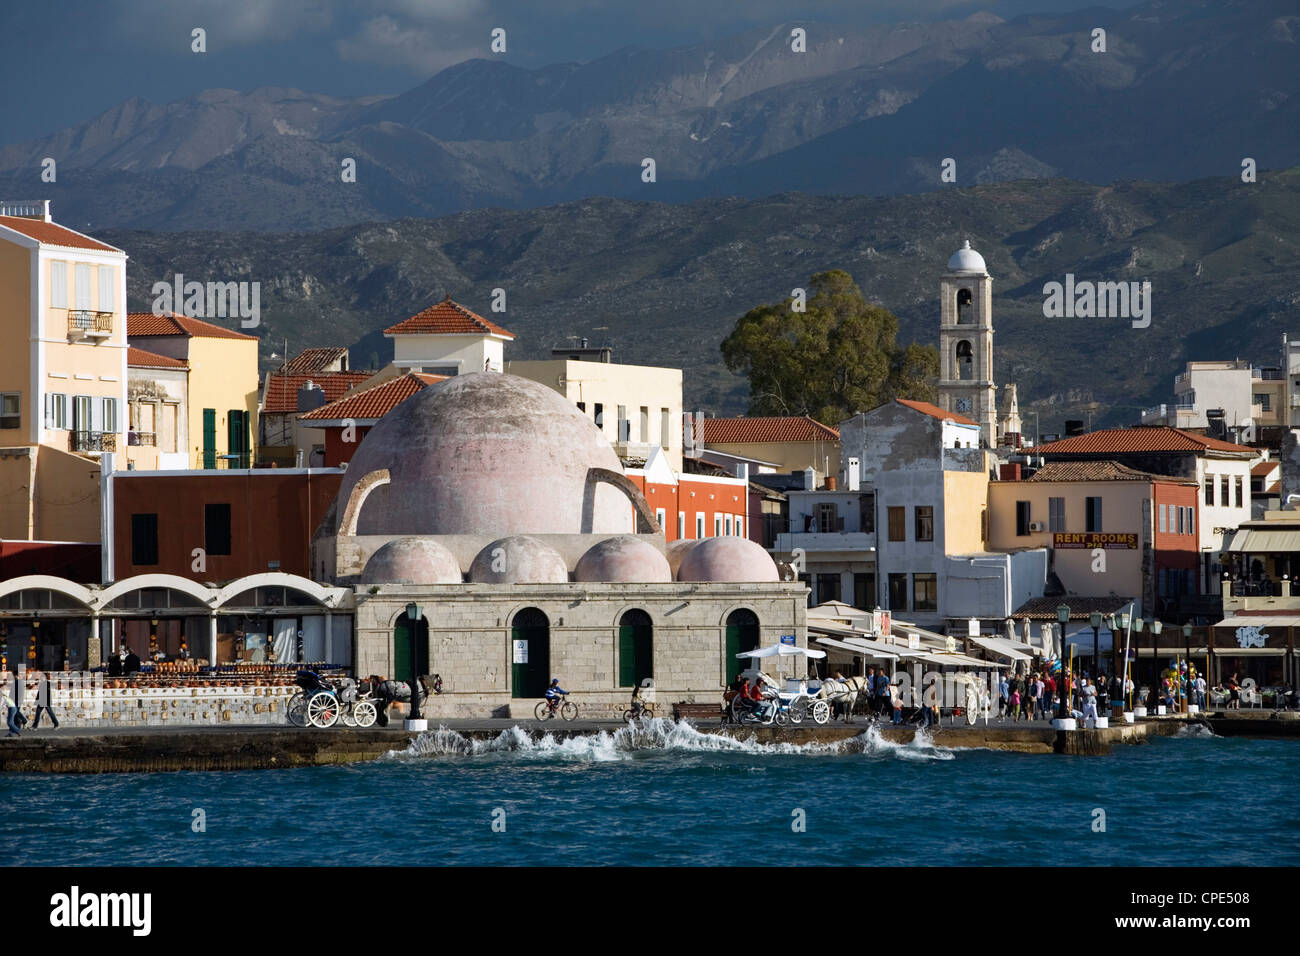 View over Venetian Harbour to Mosque of the Janissaries, Chania (Hania), Chania region, Crete, Greek Islands, Greece, Europe Stock Photo